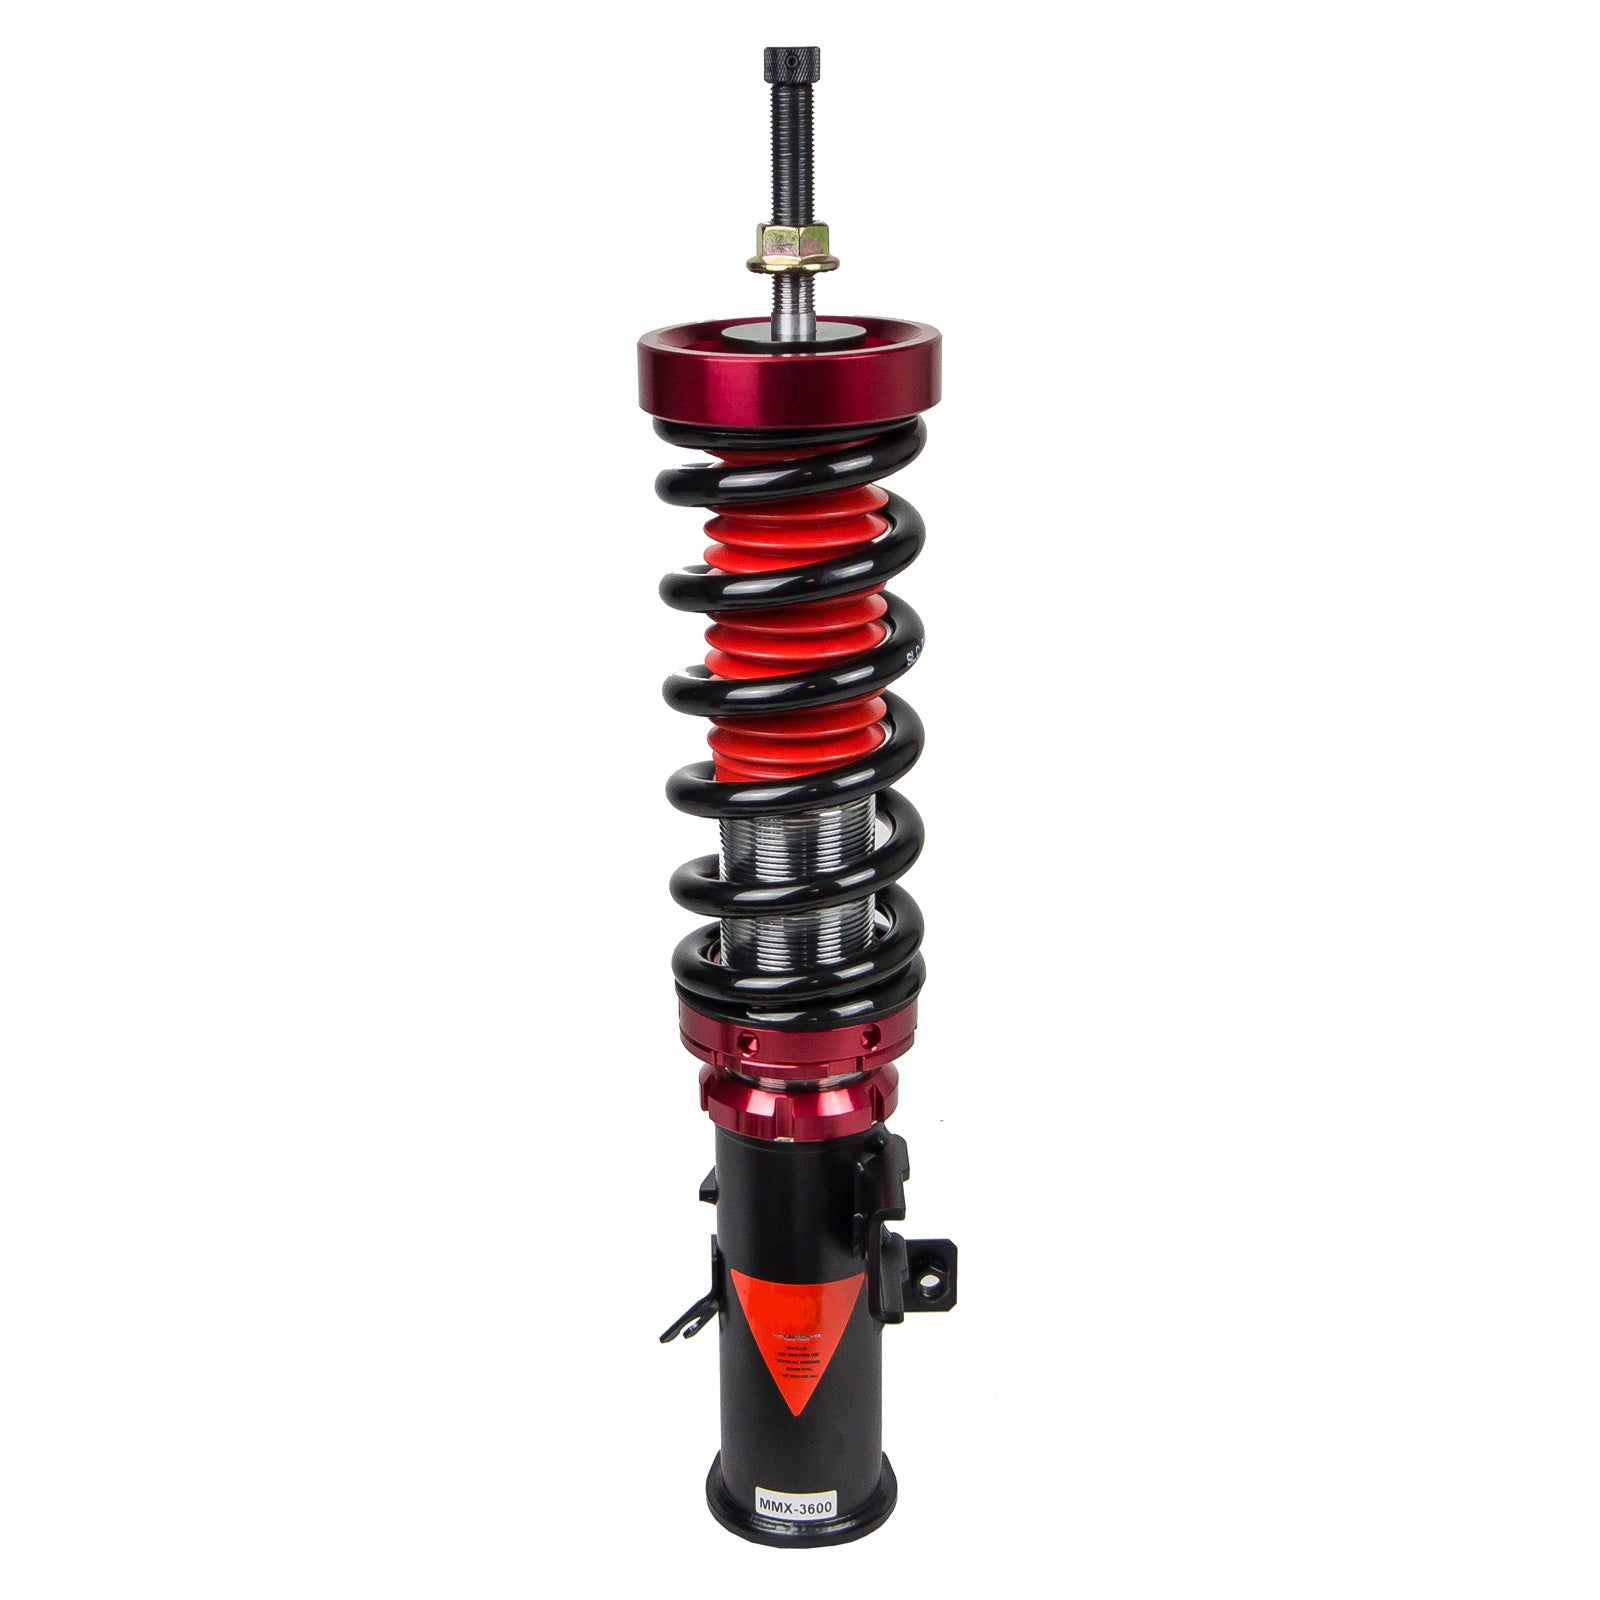 MMX3600 MAXX Coilovers Lowering Kit, Fully Adjustable, Ride Height, 40 Clicks Rebound Settings, Chevrolet Camaro 10-15